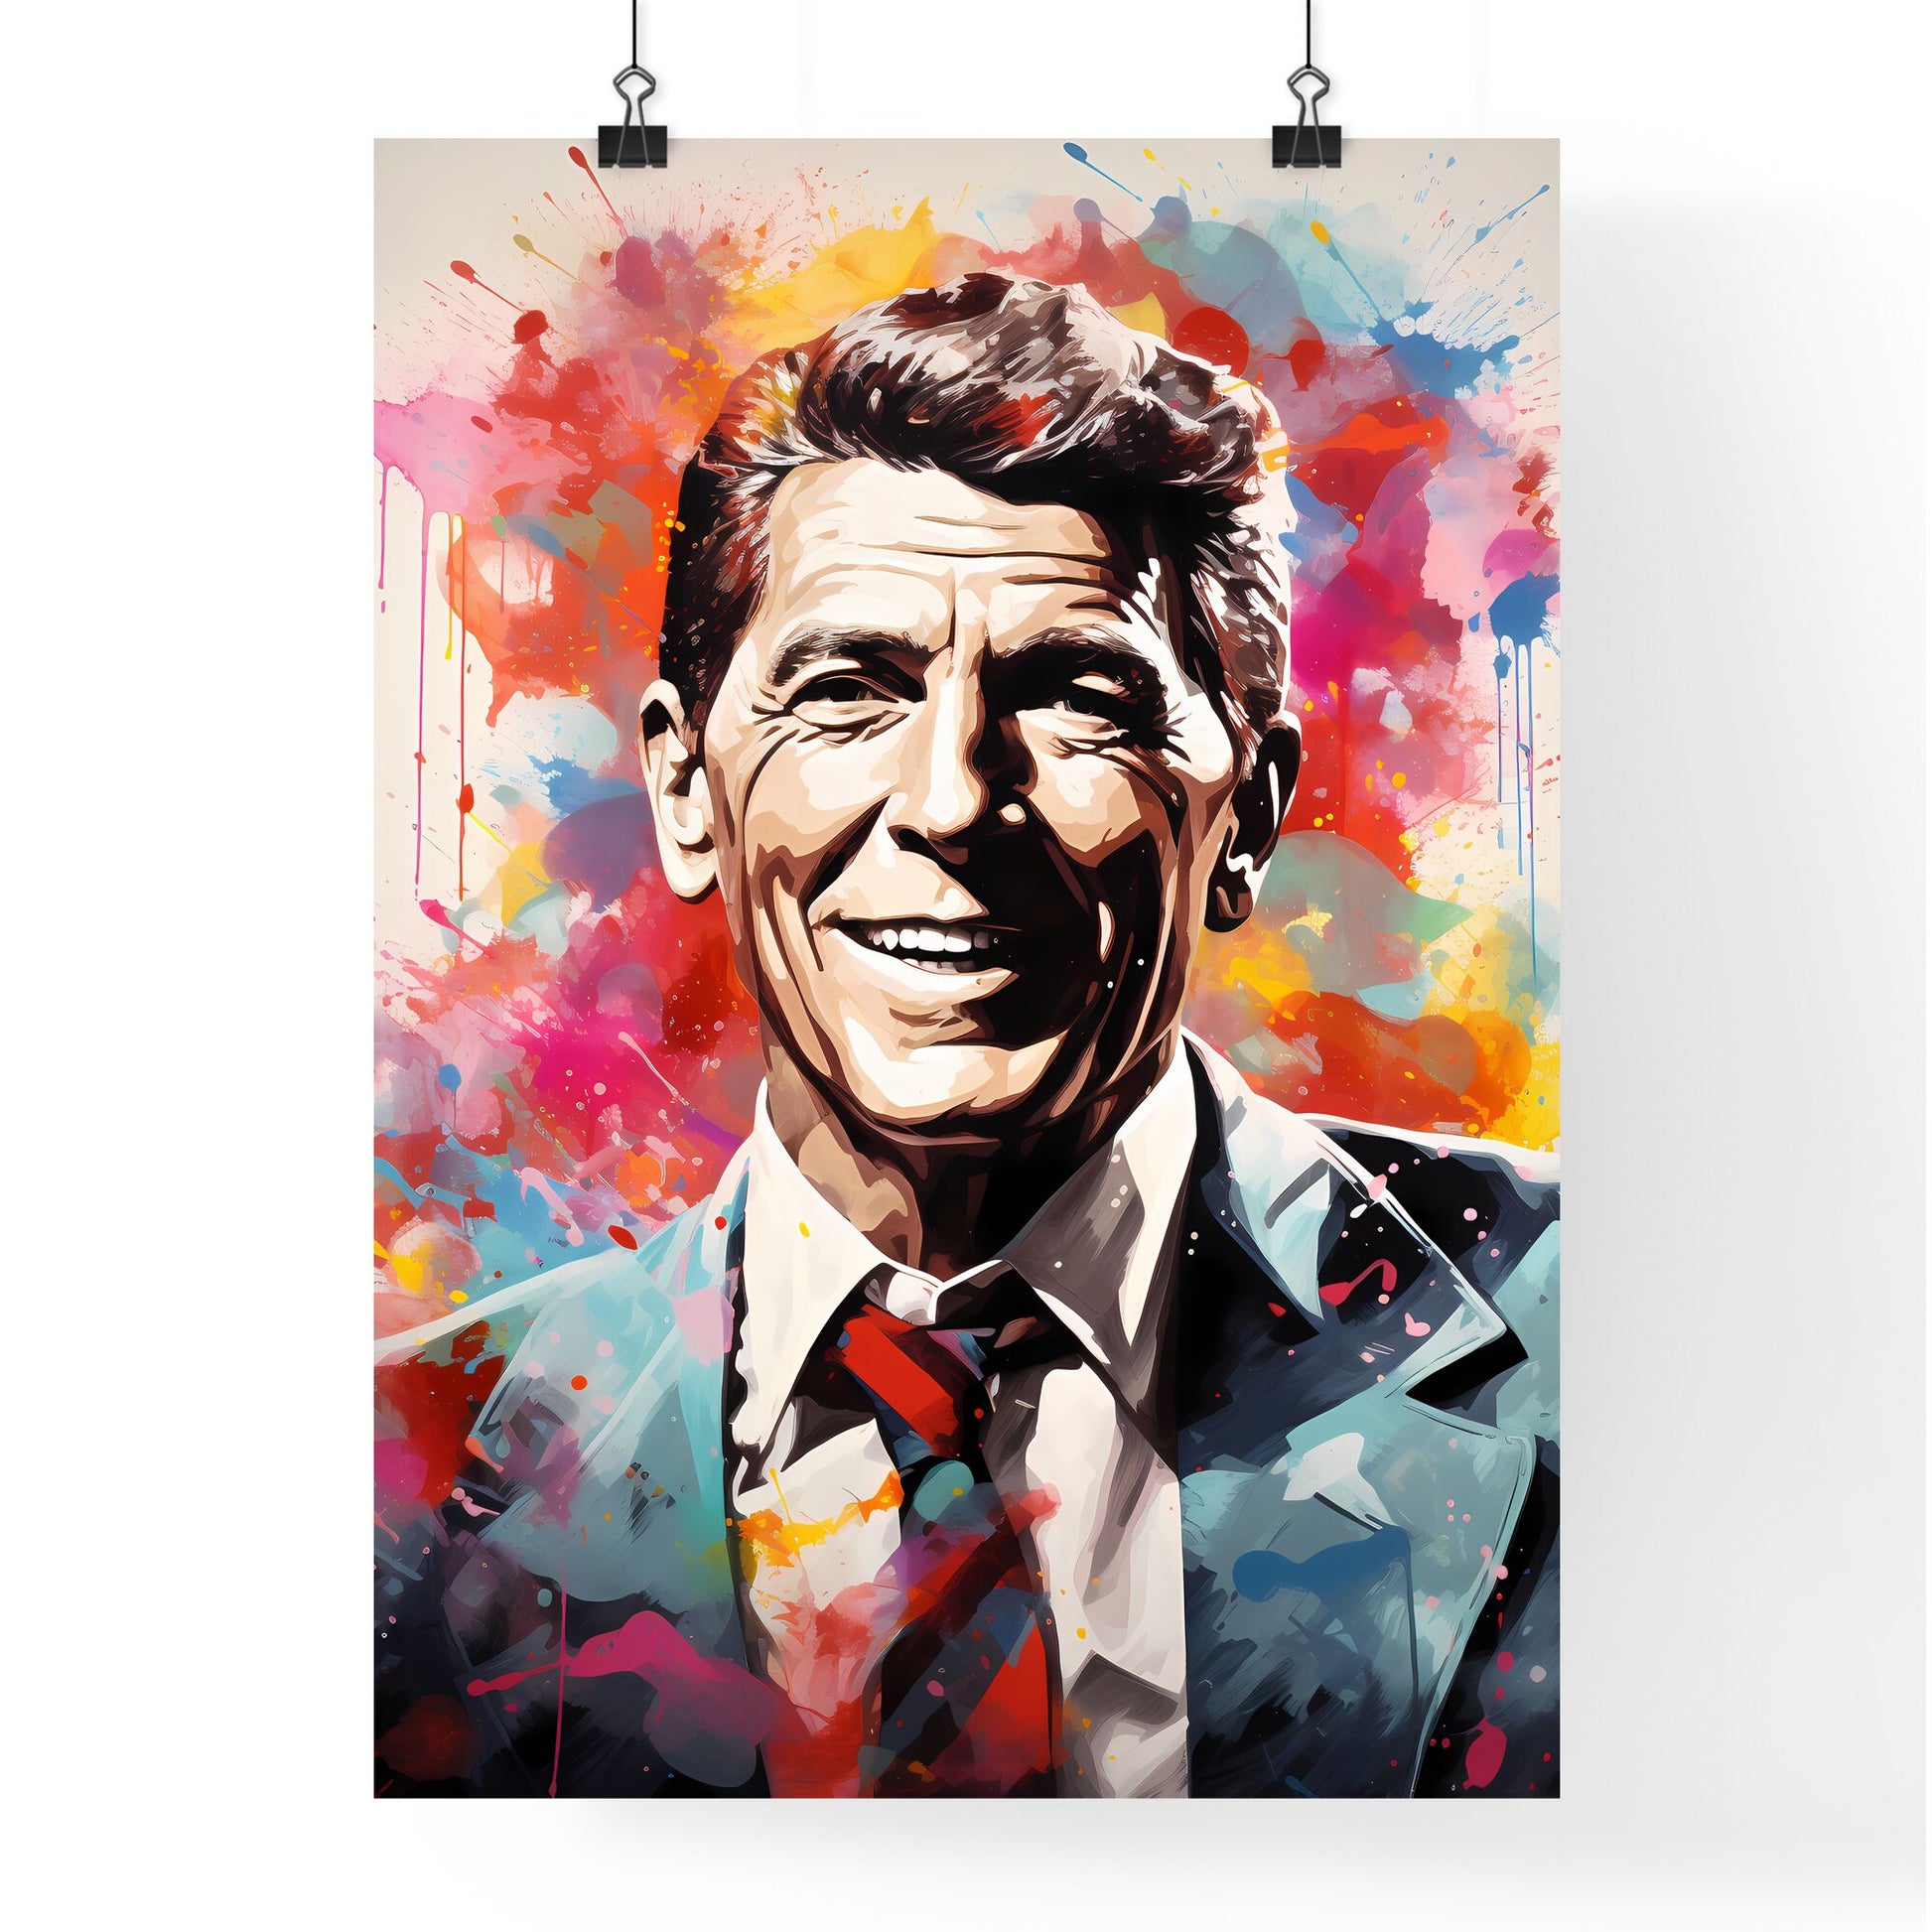 Ronald Reagan - A Man In A Suit And Tie Default Title